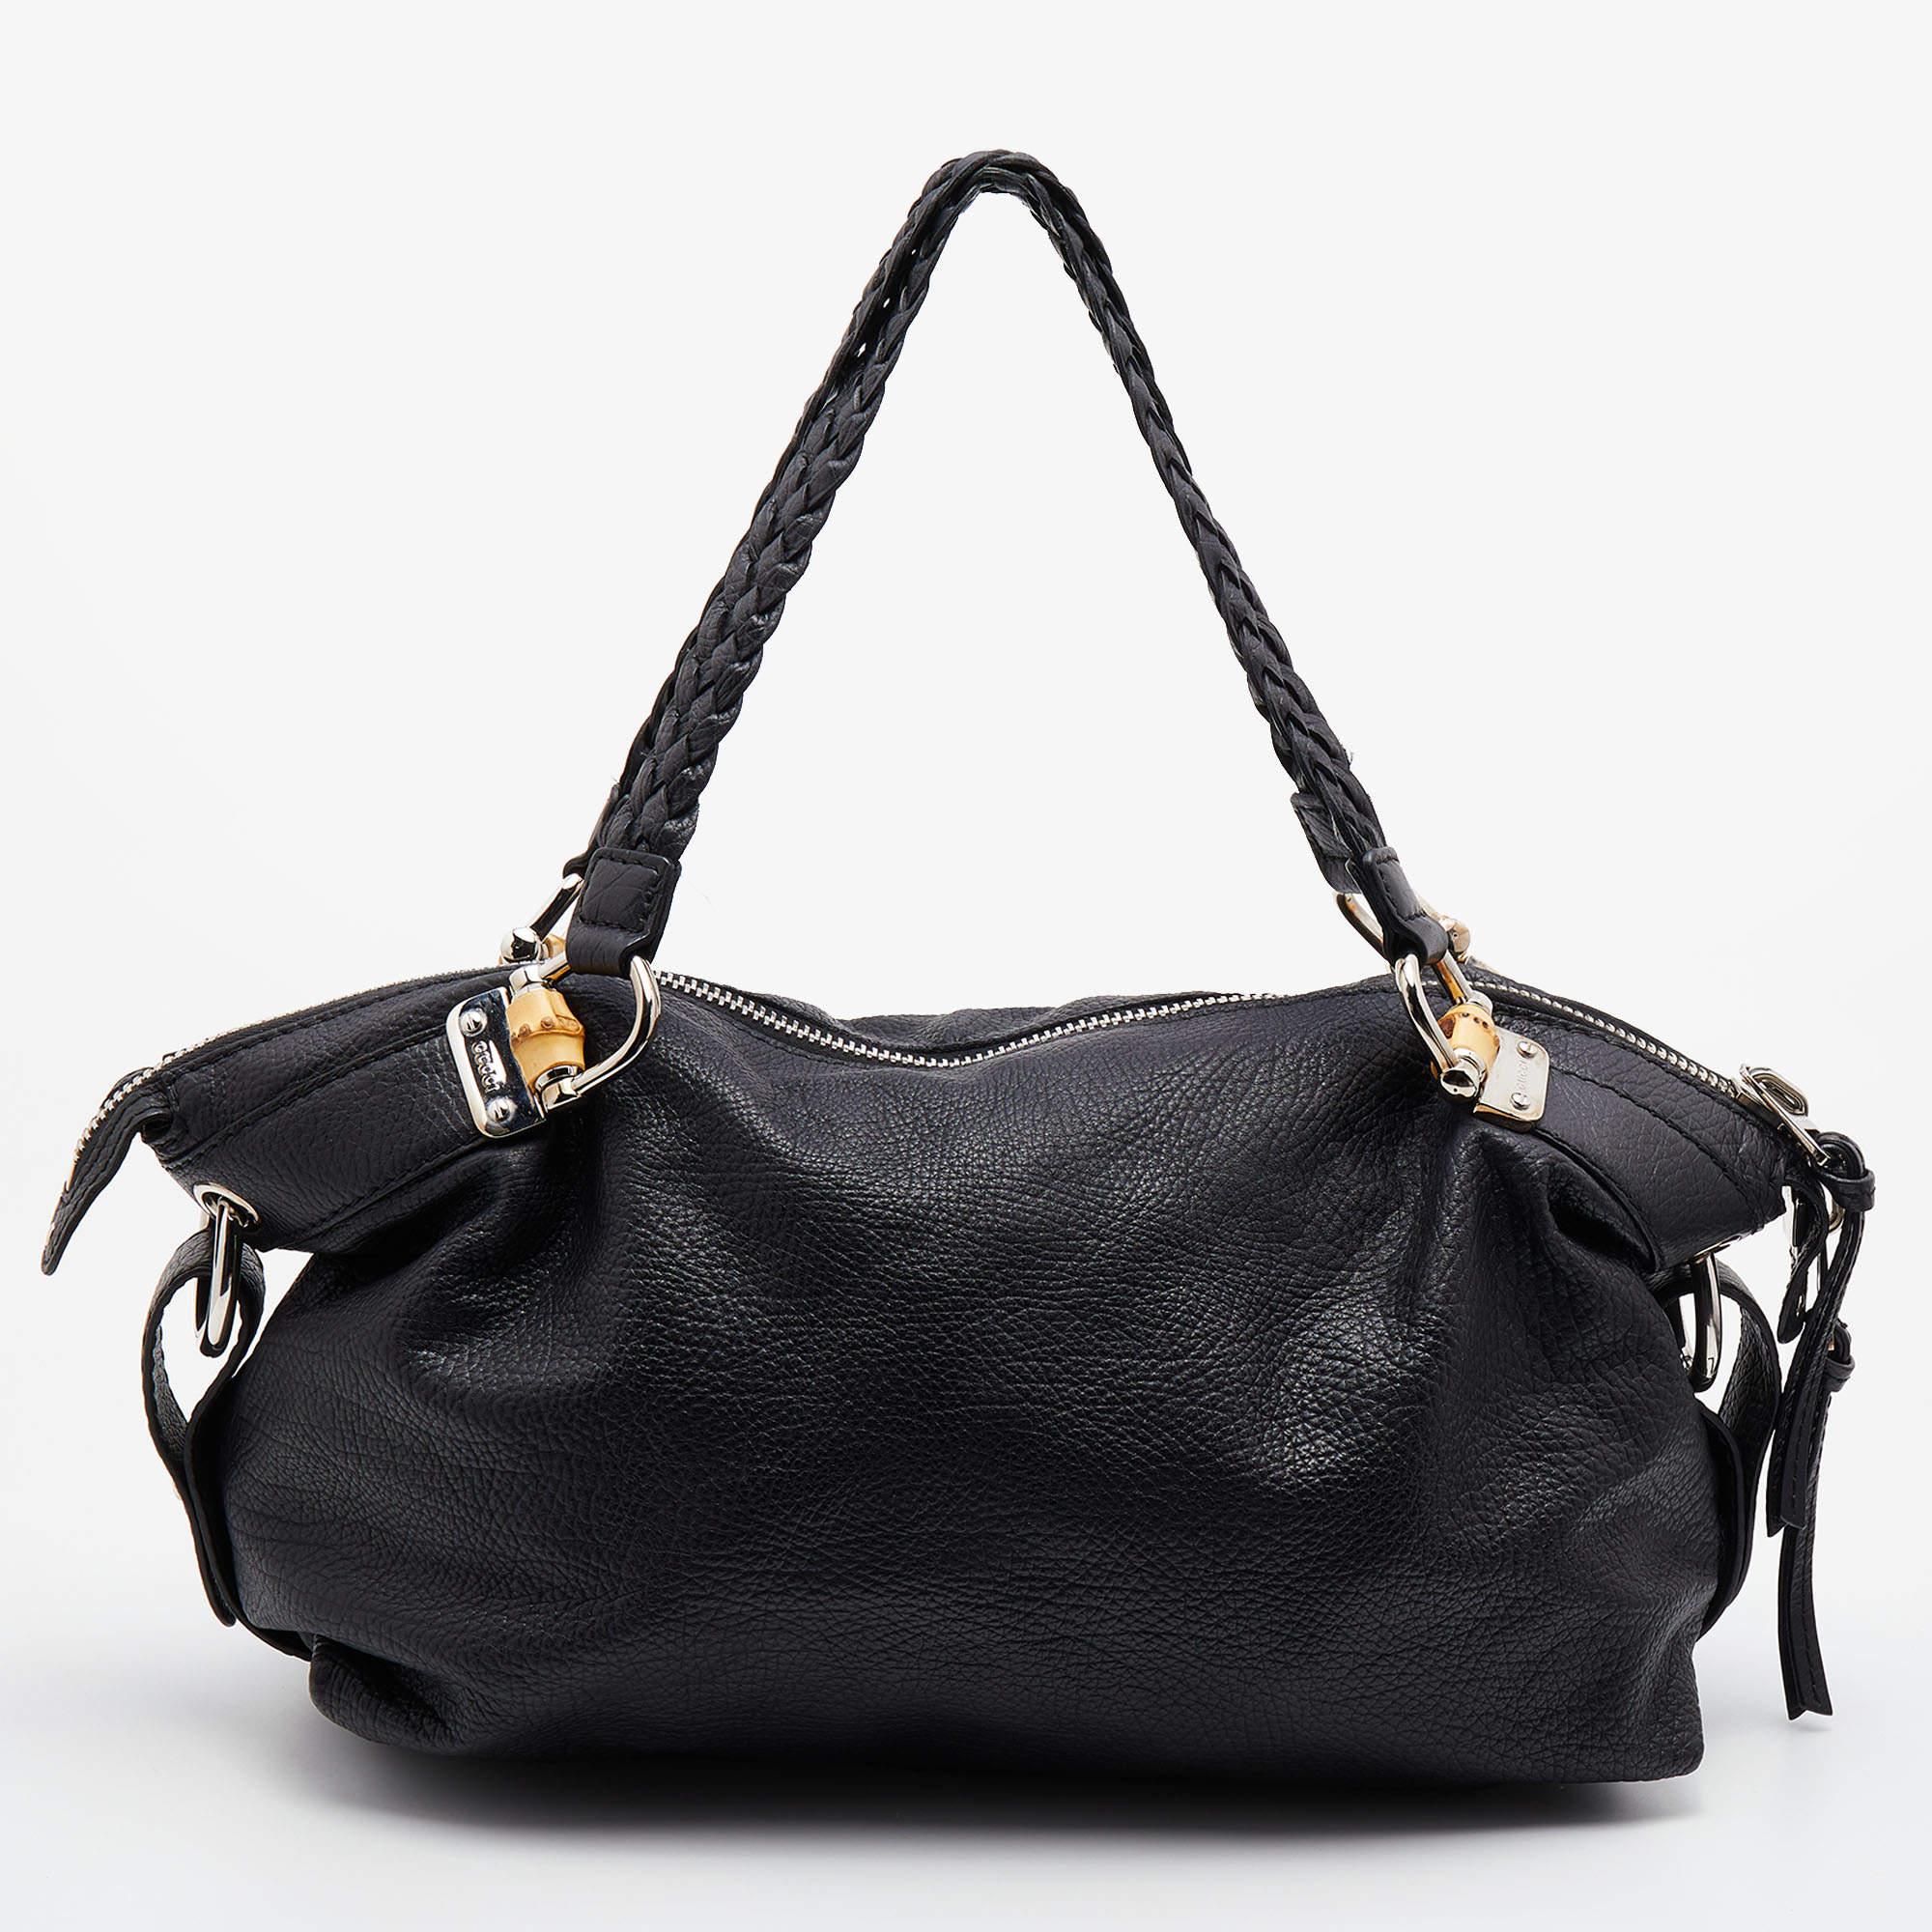 Stylish and easy to carry, this designer satchel will be a fine choice for work or after. Lined well, this pre-loved bag for women can easily fit all your essentials. It can be held in your arm or hand.

Includes: Original Dustbag

